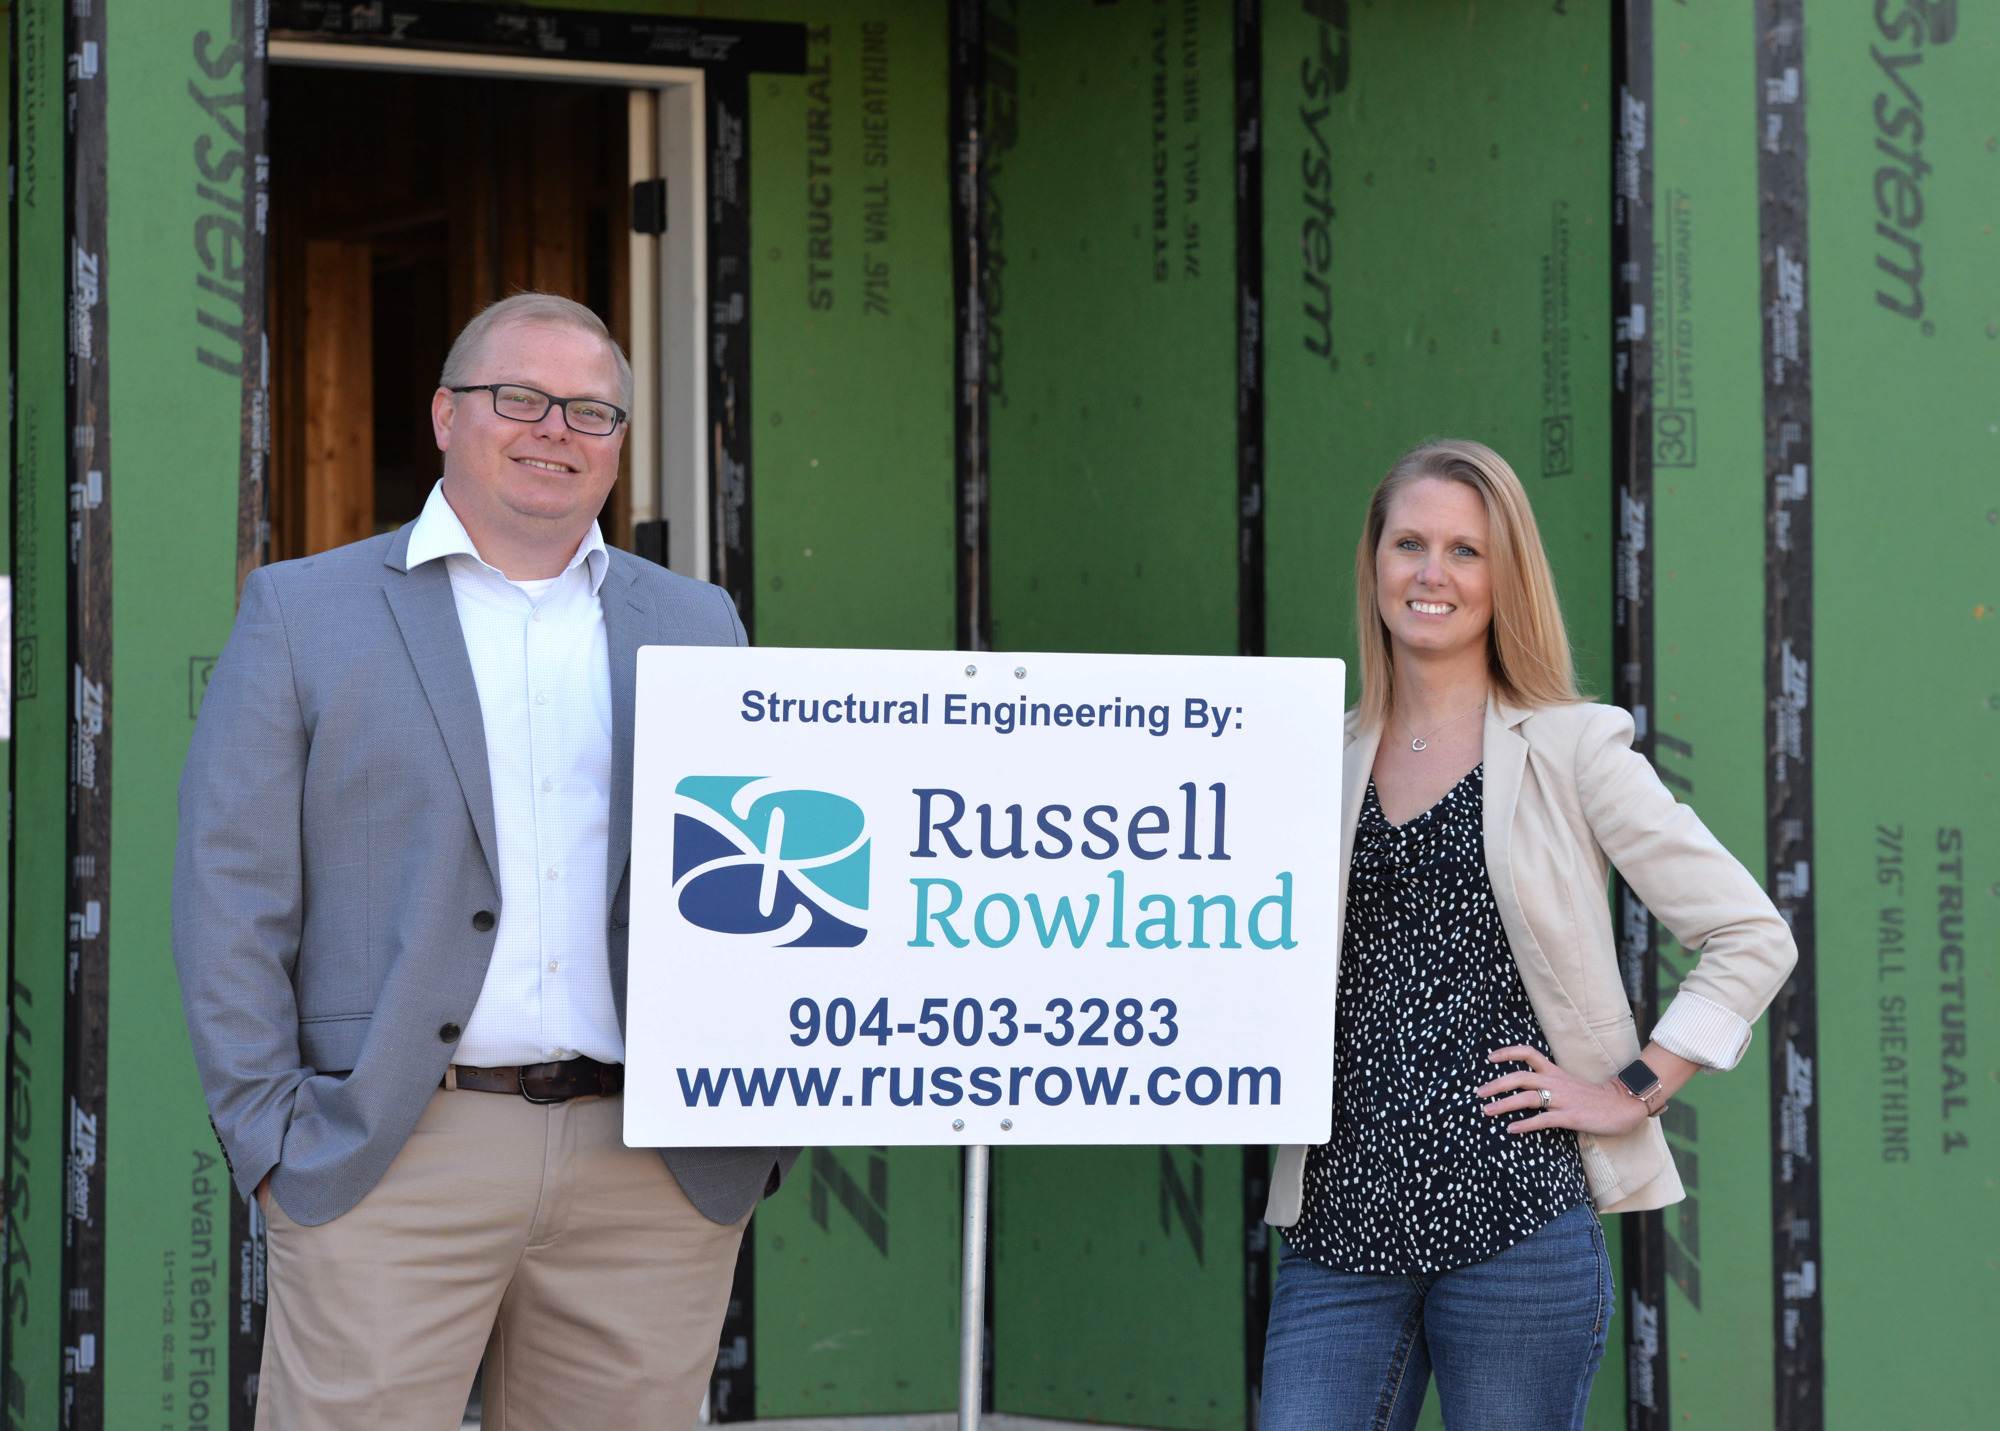 Russell Rowland is a 51-49 partnership where Rowland, 34, is president and CEO and Russell, 36, is vice president of engineering. (Photo by Dede Smith)